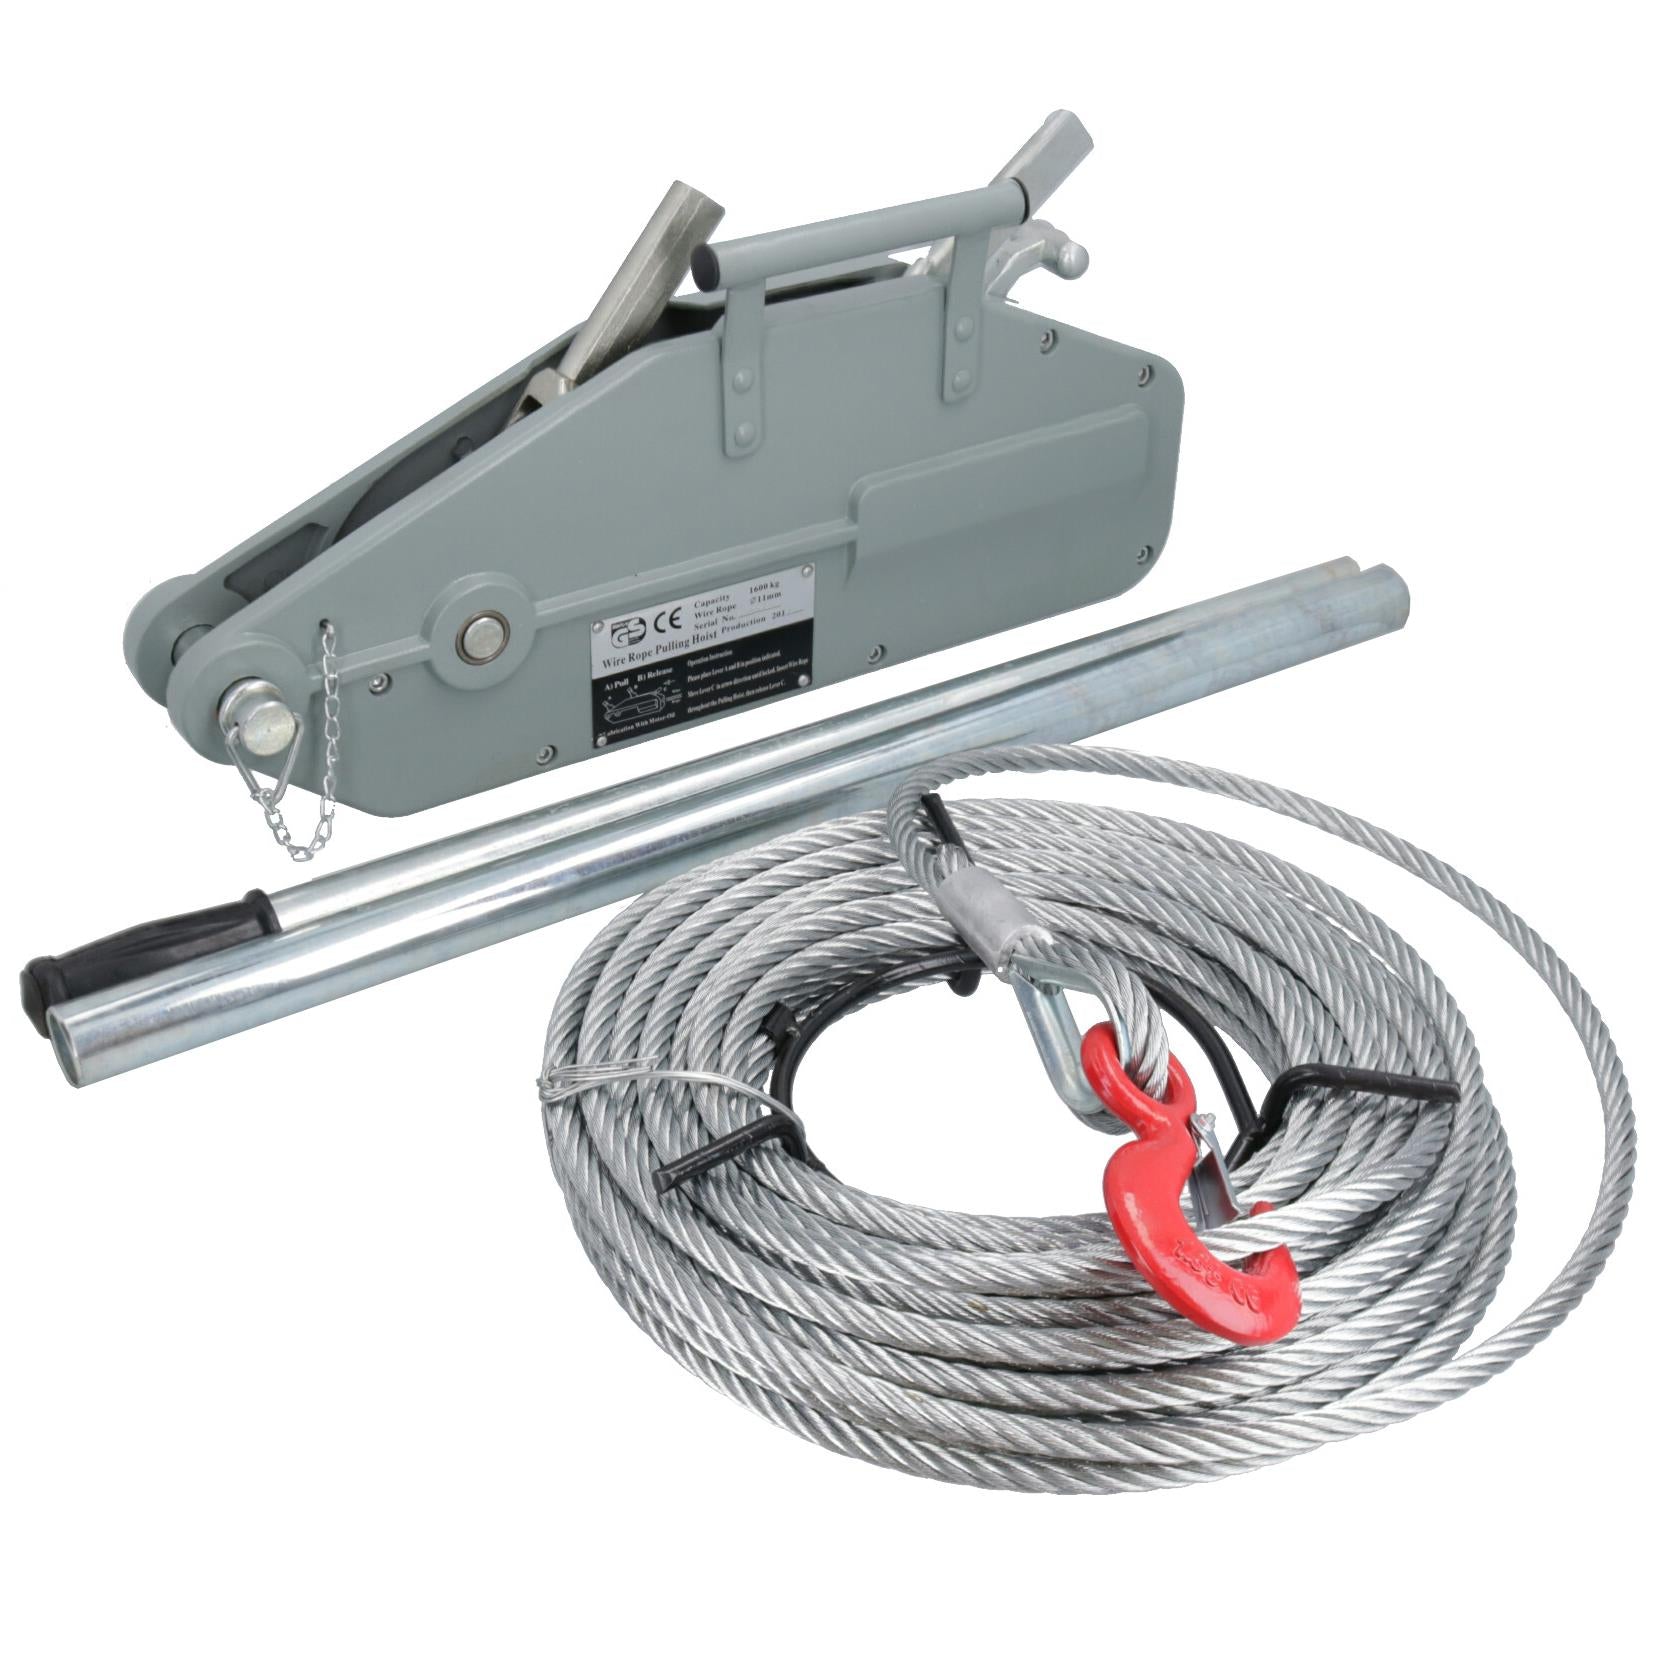 Manual Cable Puller Hand Winch Lifter Mover Turfer Hoist 1600kg 20m Wire Rope